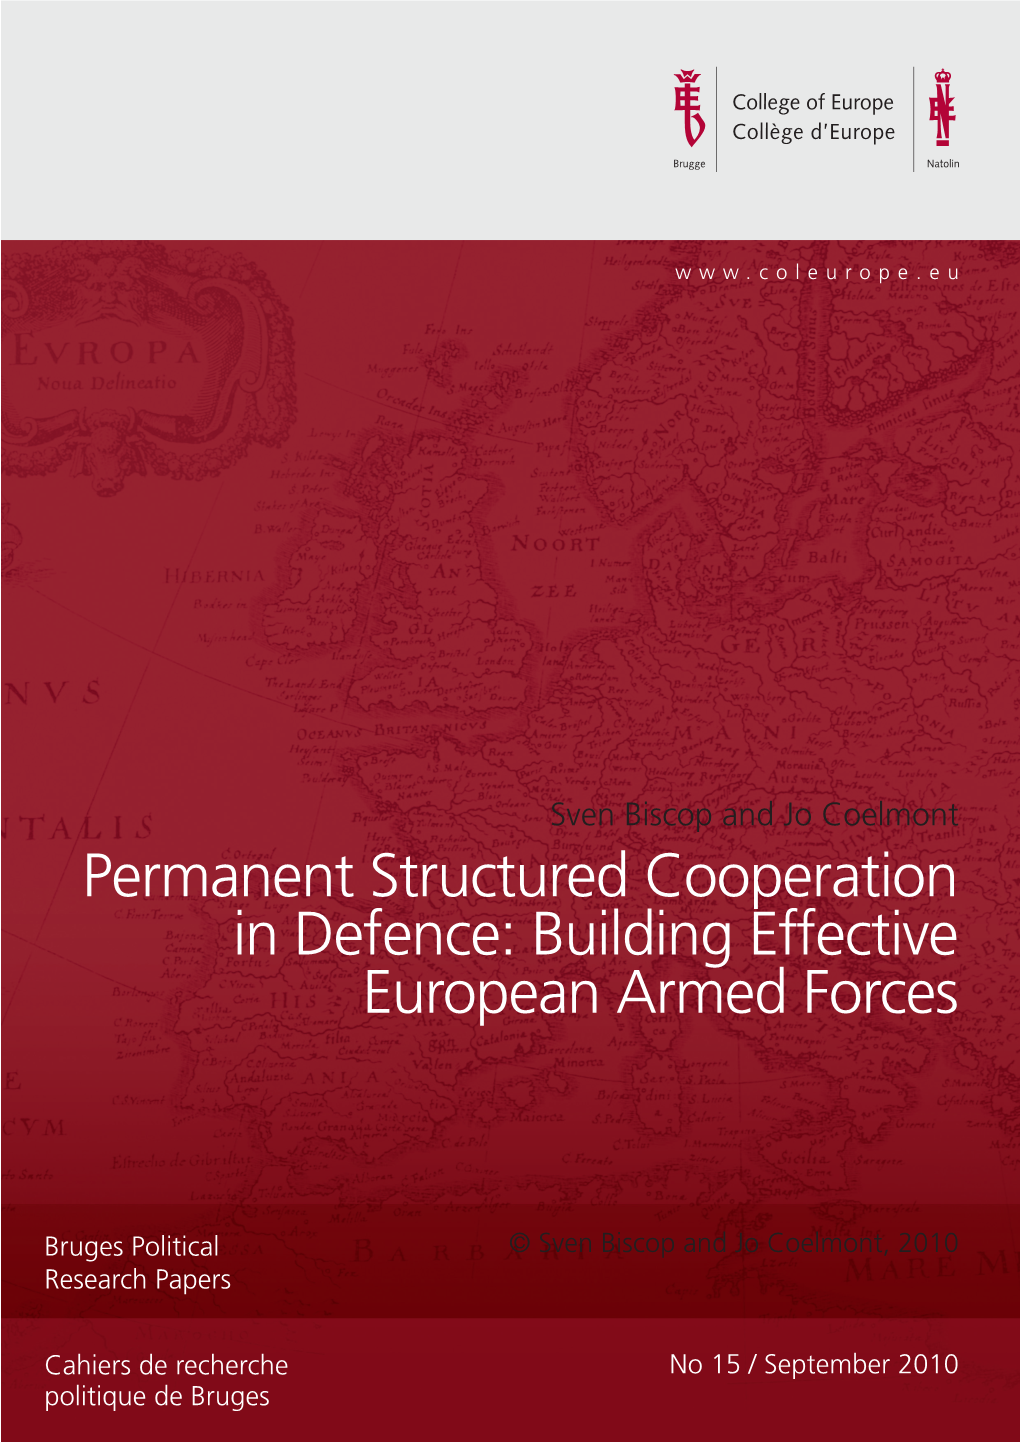 Permanent Structured Cooperation in Defence: Building Effective European Armed Forces